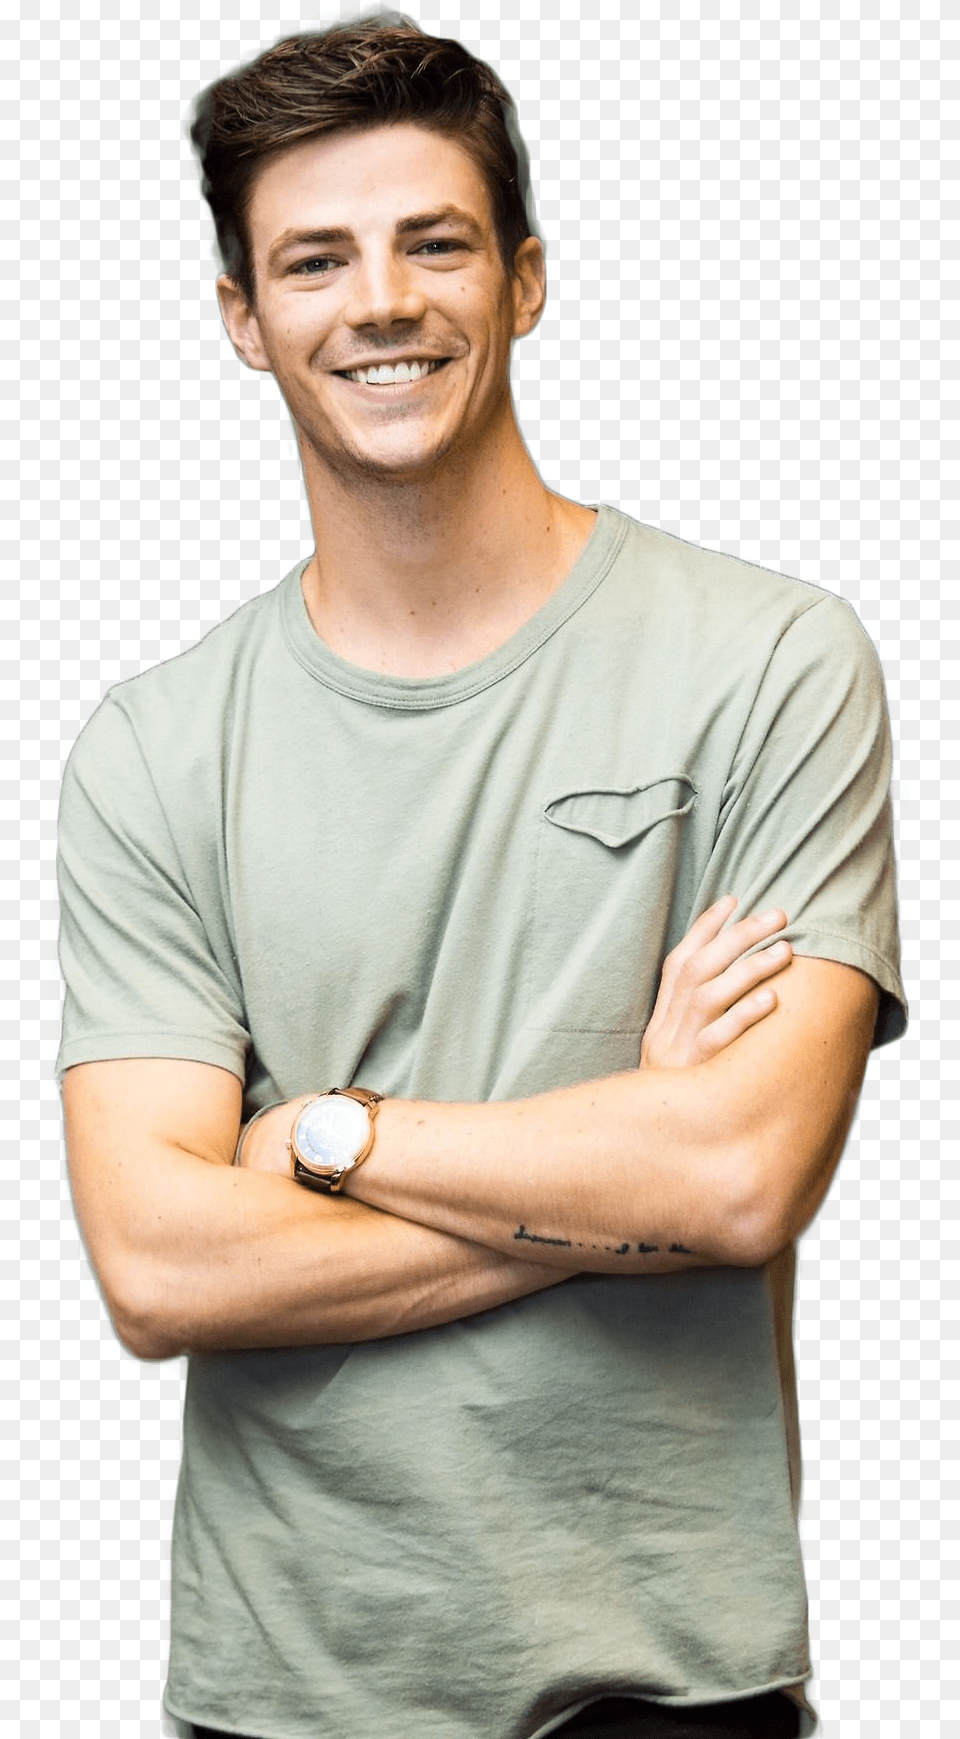 Grant Gustin Background Celebrities Grant Gustin Background, Person, Head, Happy, Face Png Image